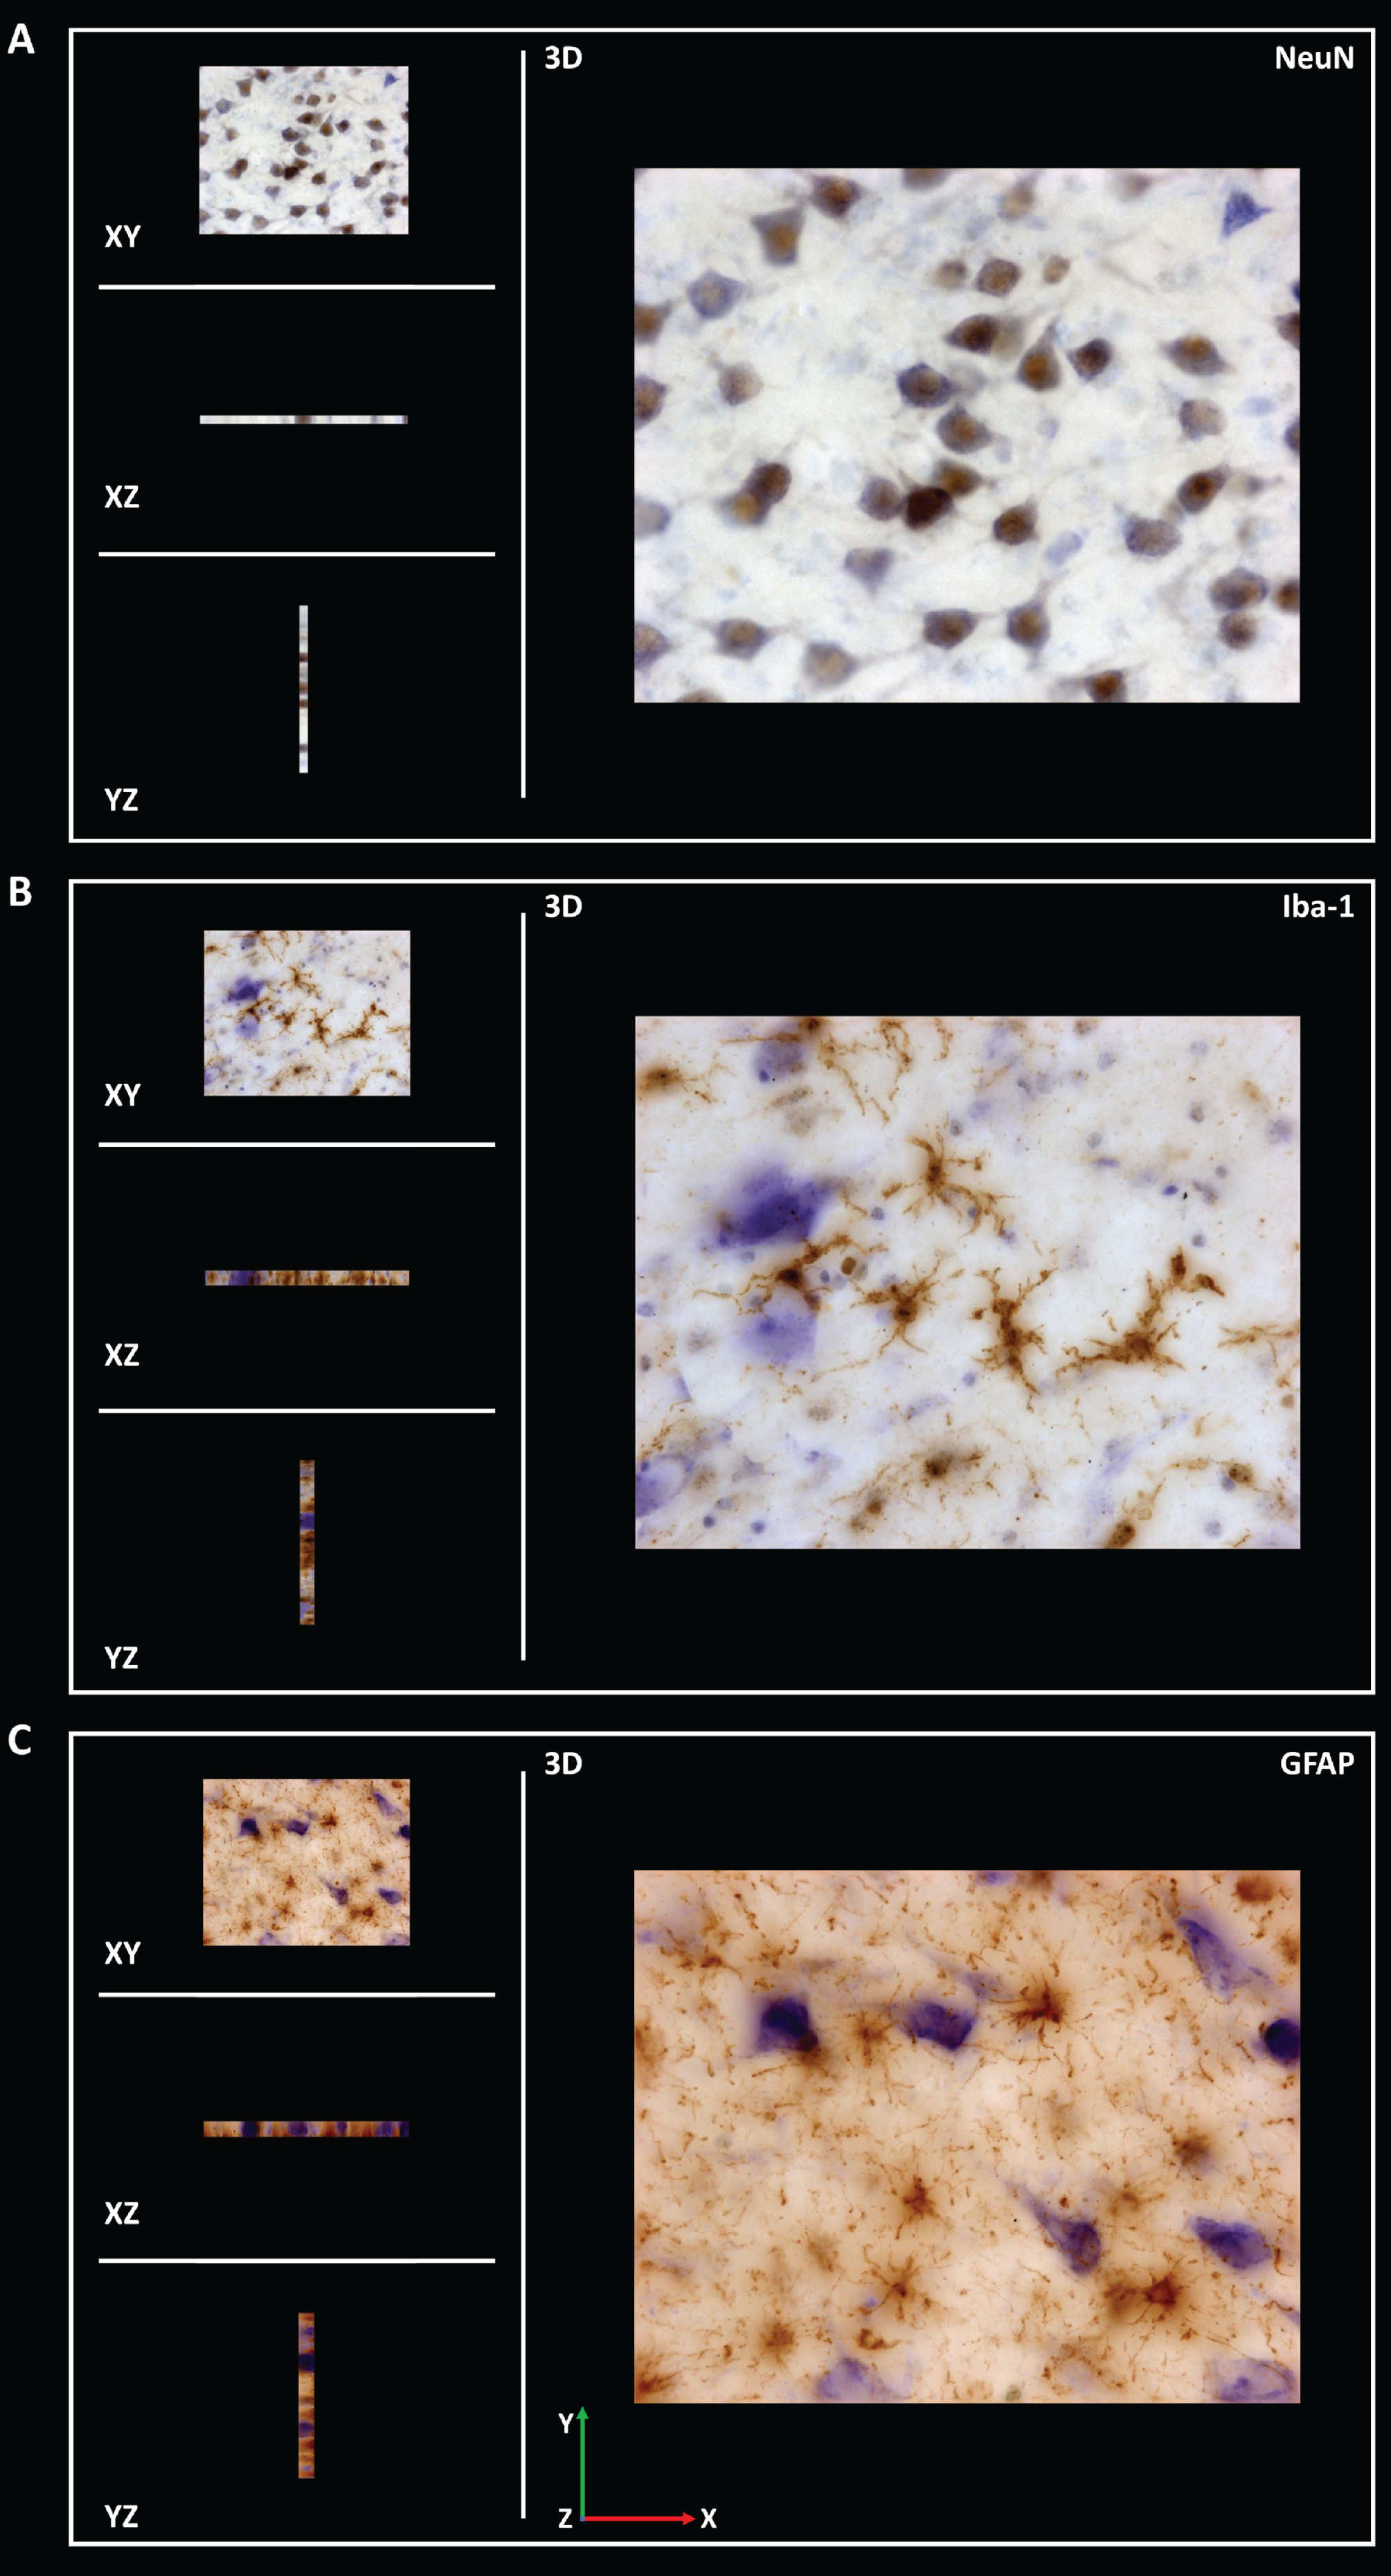 Coronal sections of z-stack of the human hippocampus immunohistochemically stained for NeuN (A), Iba-1 (B) and GFAP (C) were acquired to analyze the infiltration of respective antibodies.